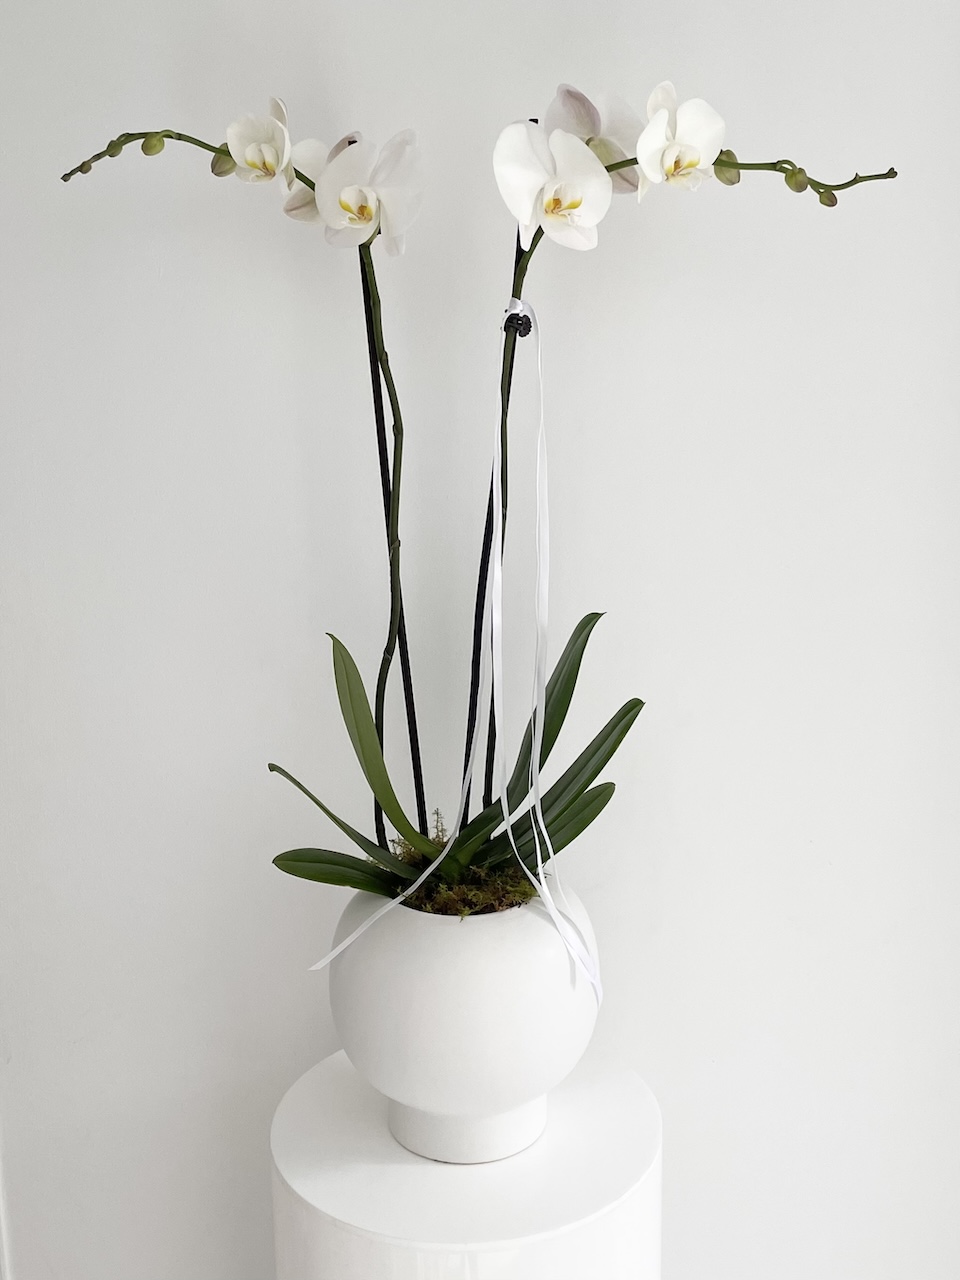 Caring for your orchid phalaenopsis orchid plants blog. Image of a LULLY & ROSE Floral Studio white phalaenopsis orchid plant potted in a white fish bowl ceramic planter.